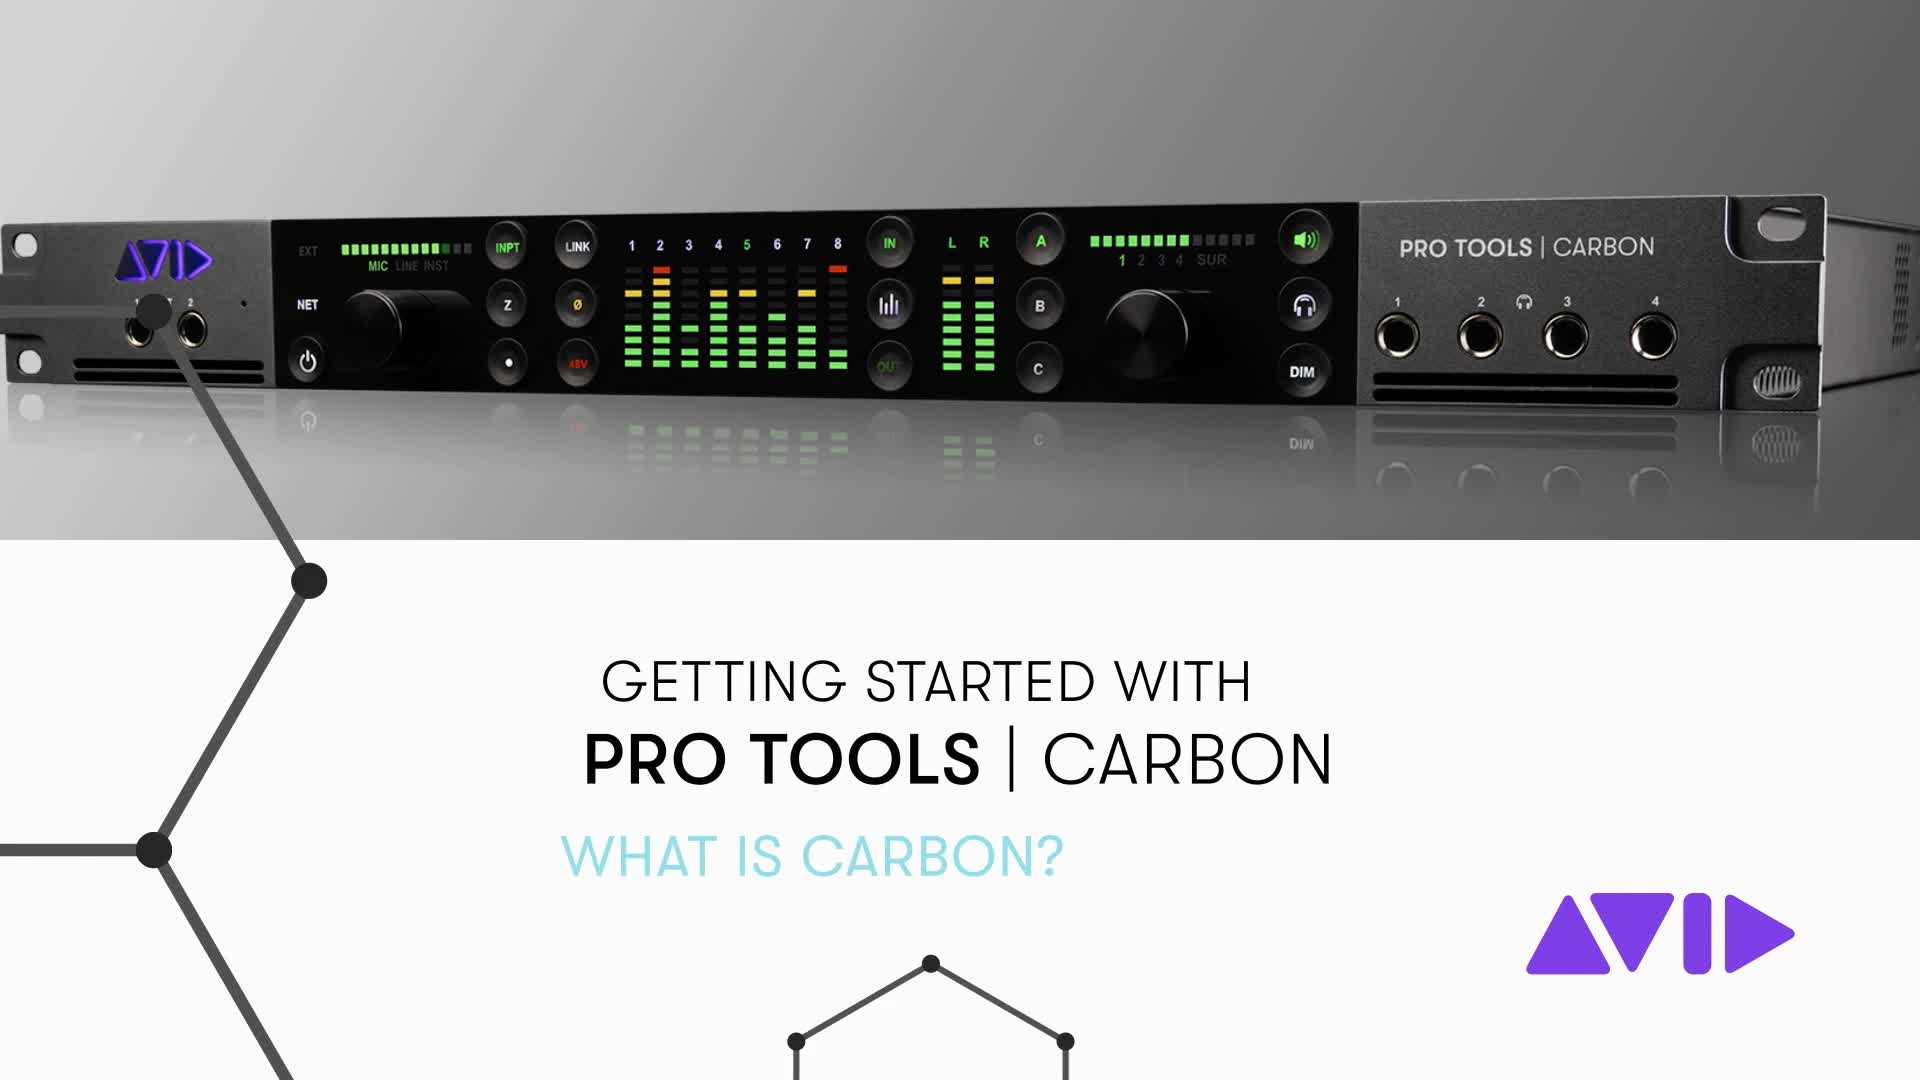 01 Pro Tools Carbon Getting Started - What is Carbon